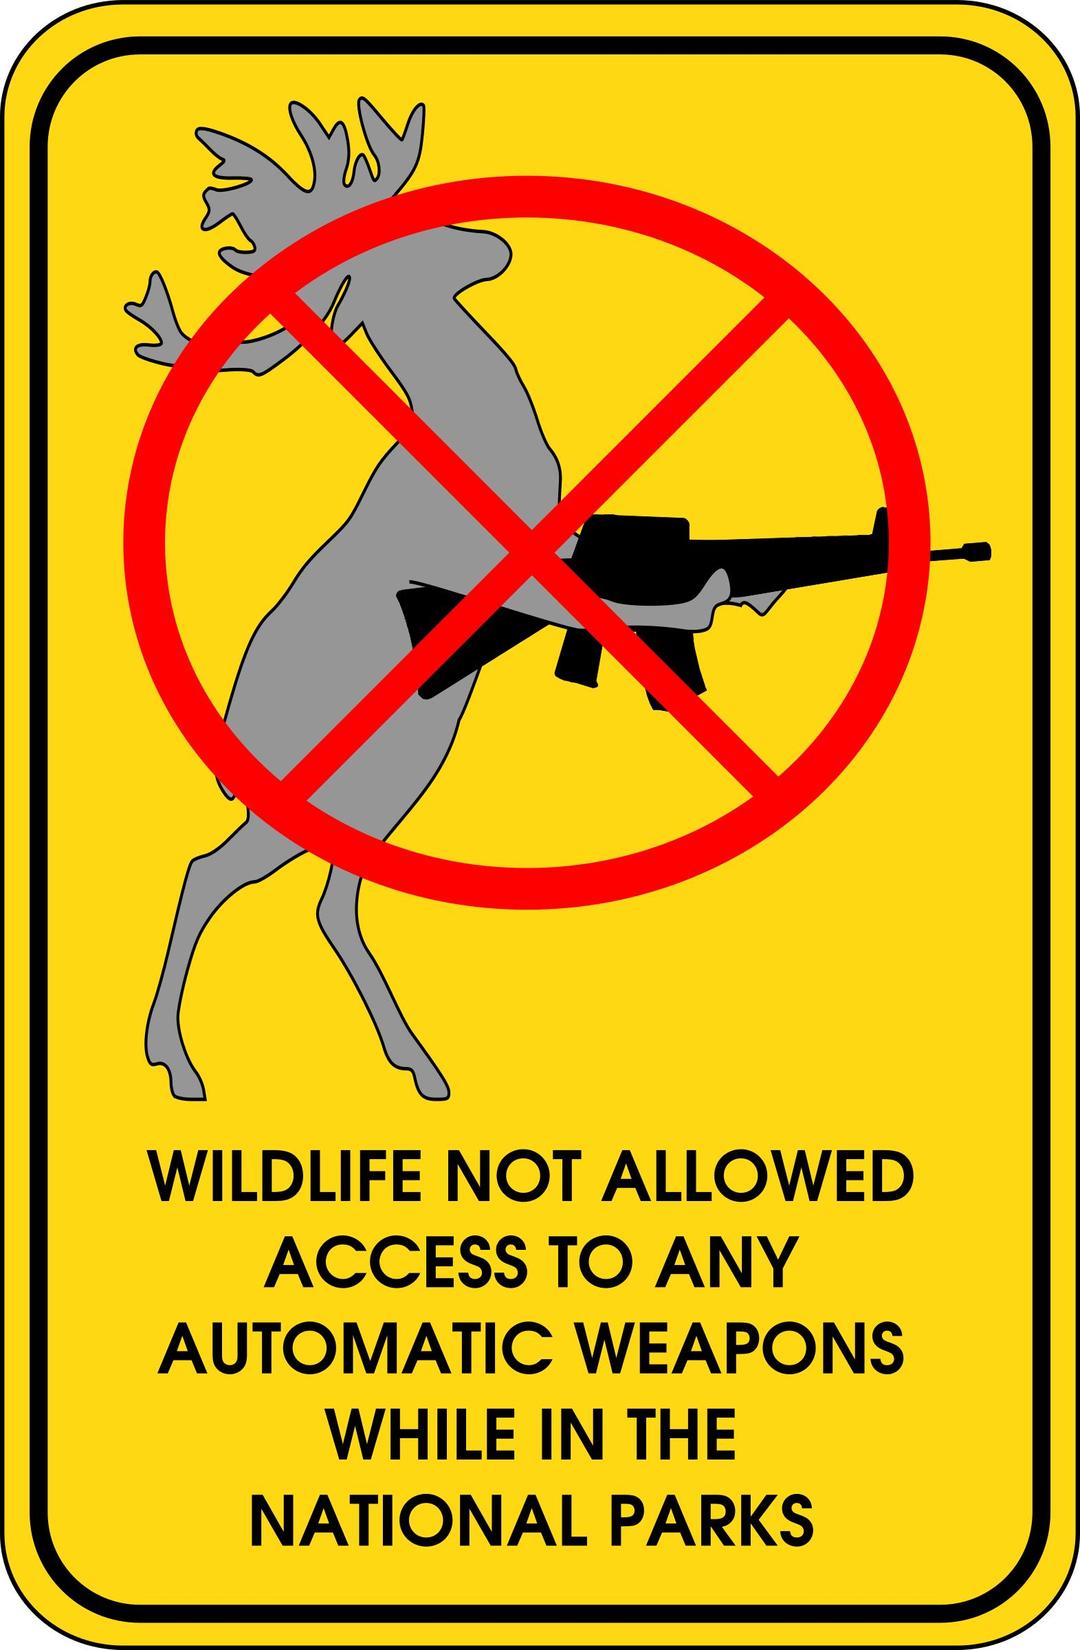 Wildlife Not Allowed To Access Automatic Weapons While In The National Parks png transparent